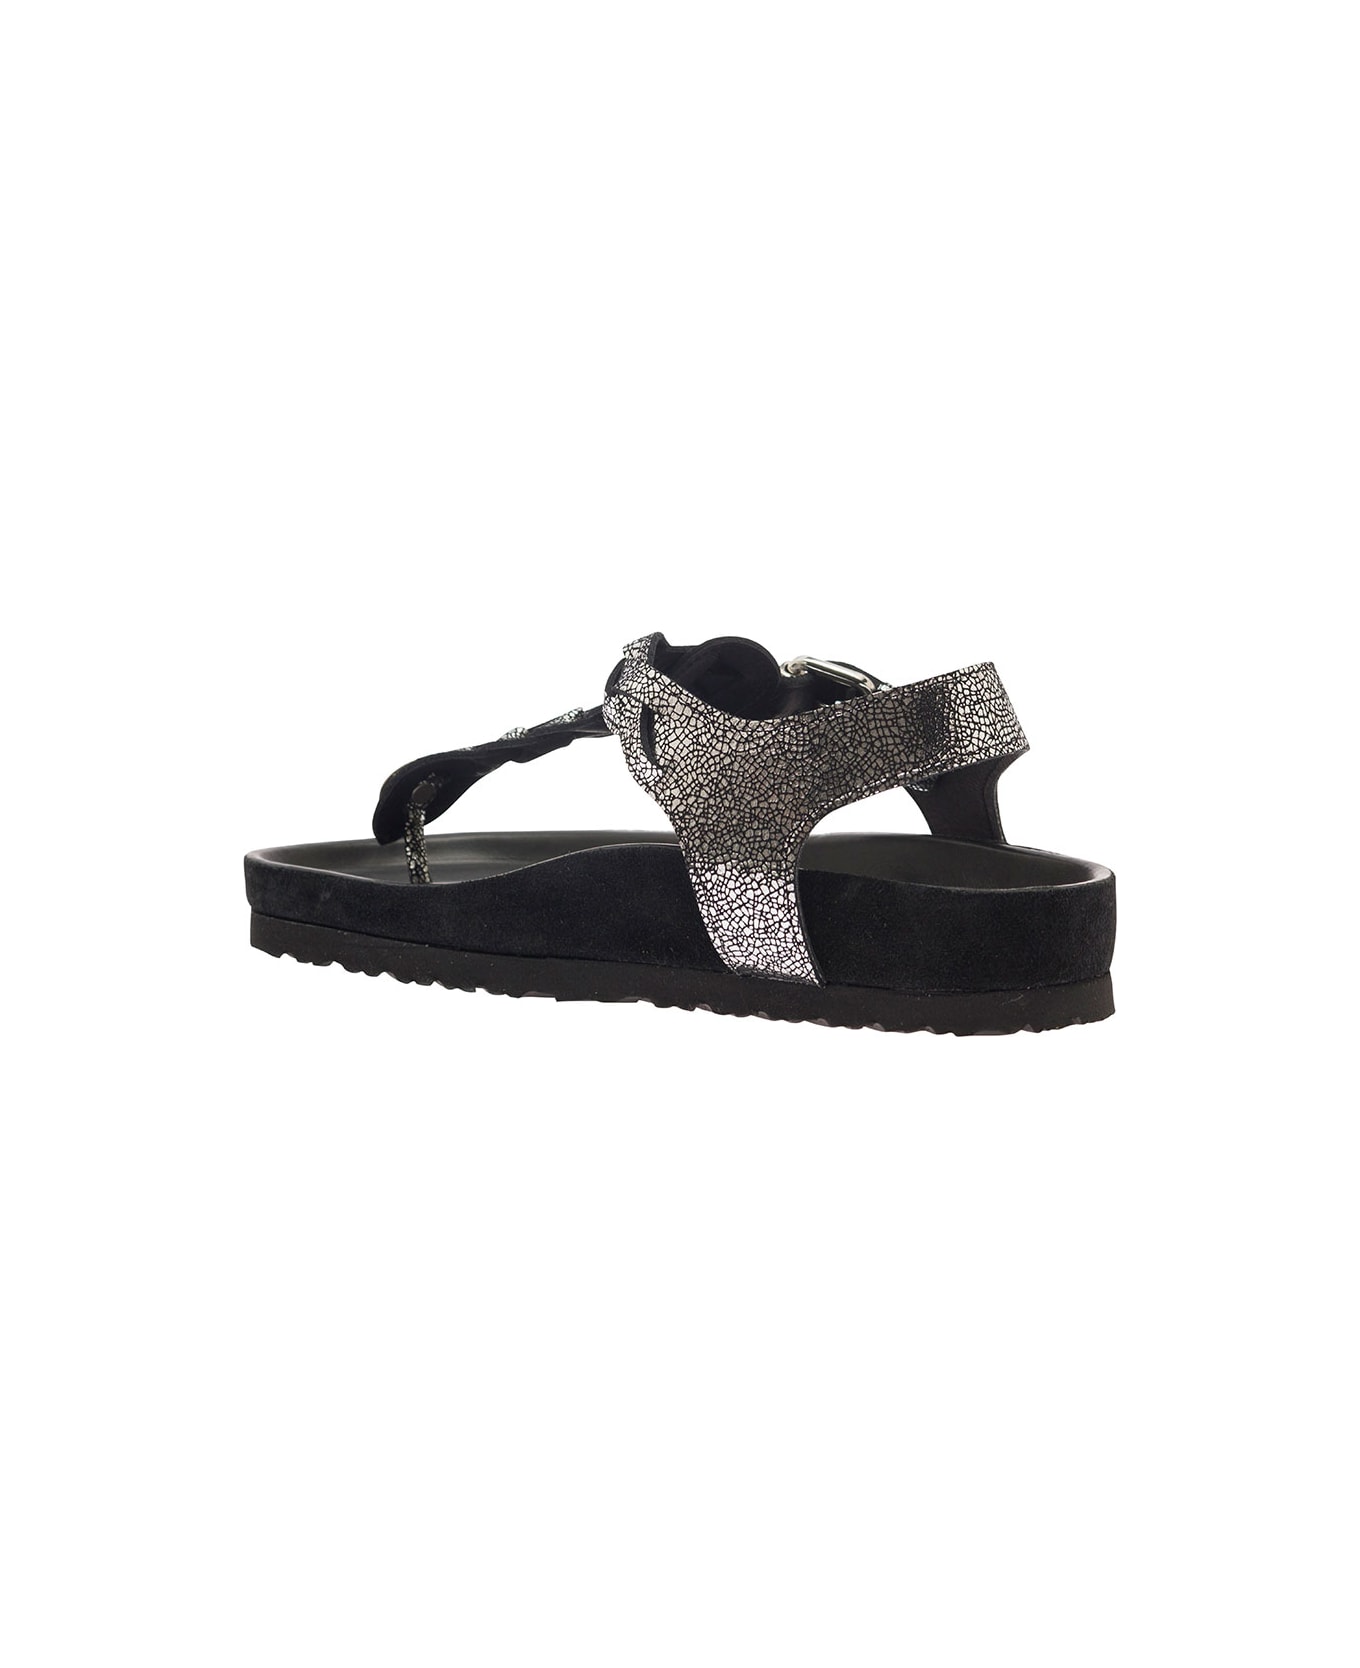 Isabel Marant 'brook' Silver Sandals With Braided Design In Metallic Leather Woman - Metallic